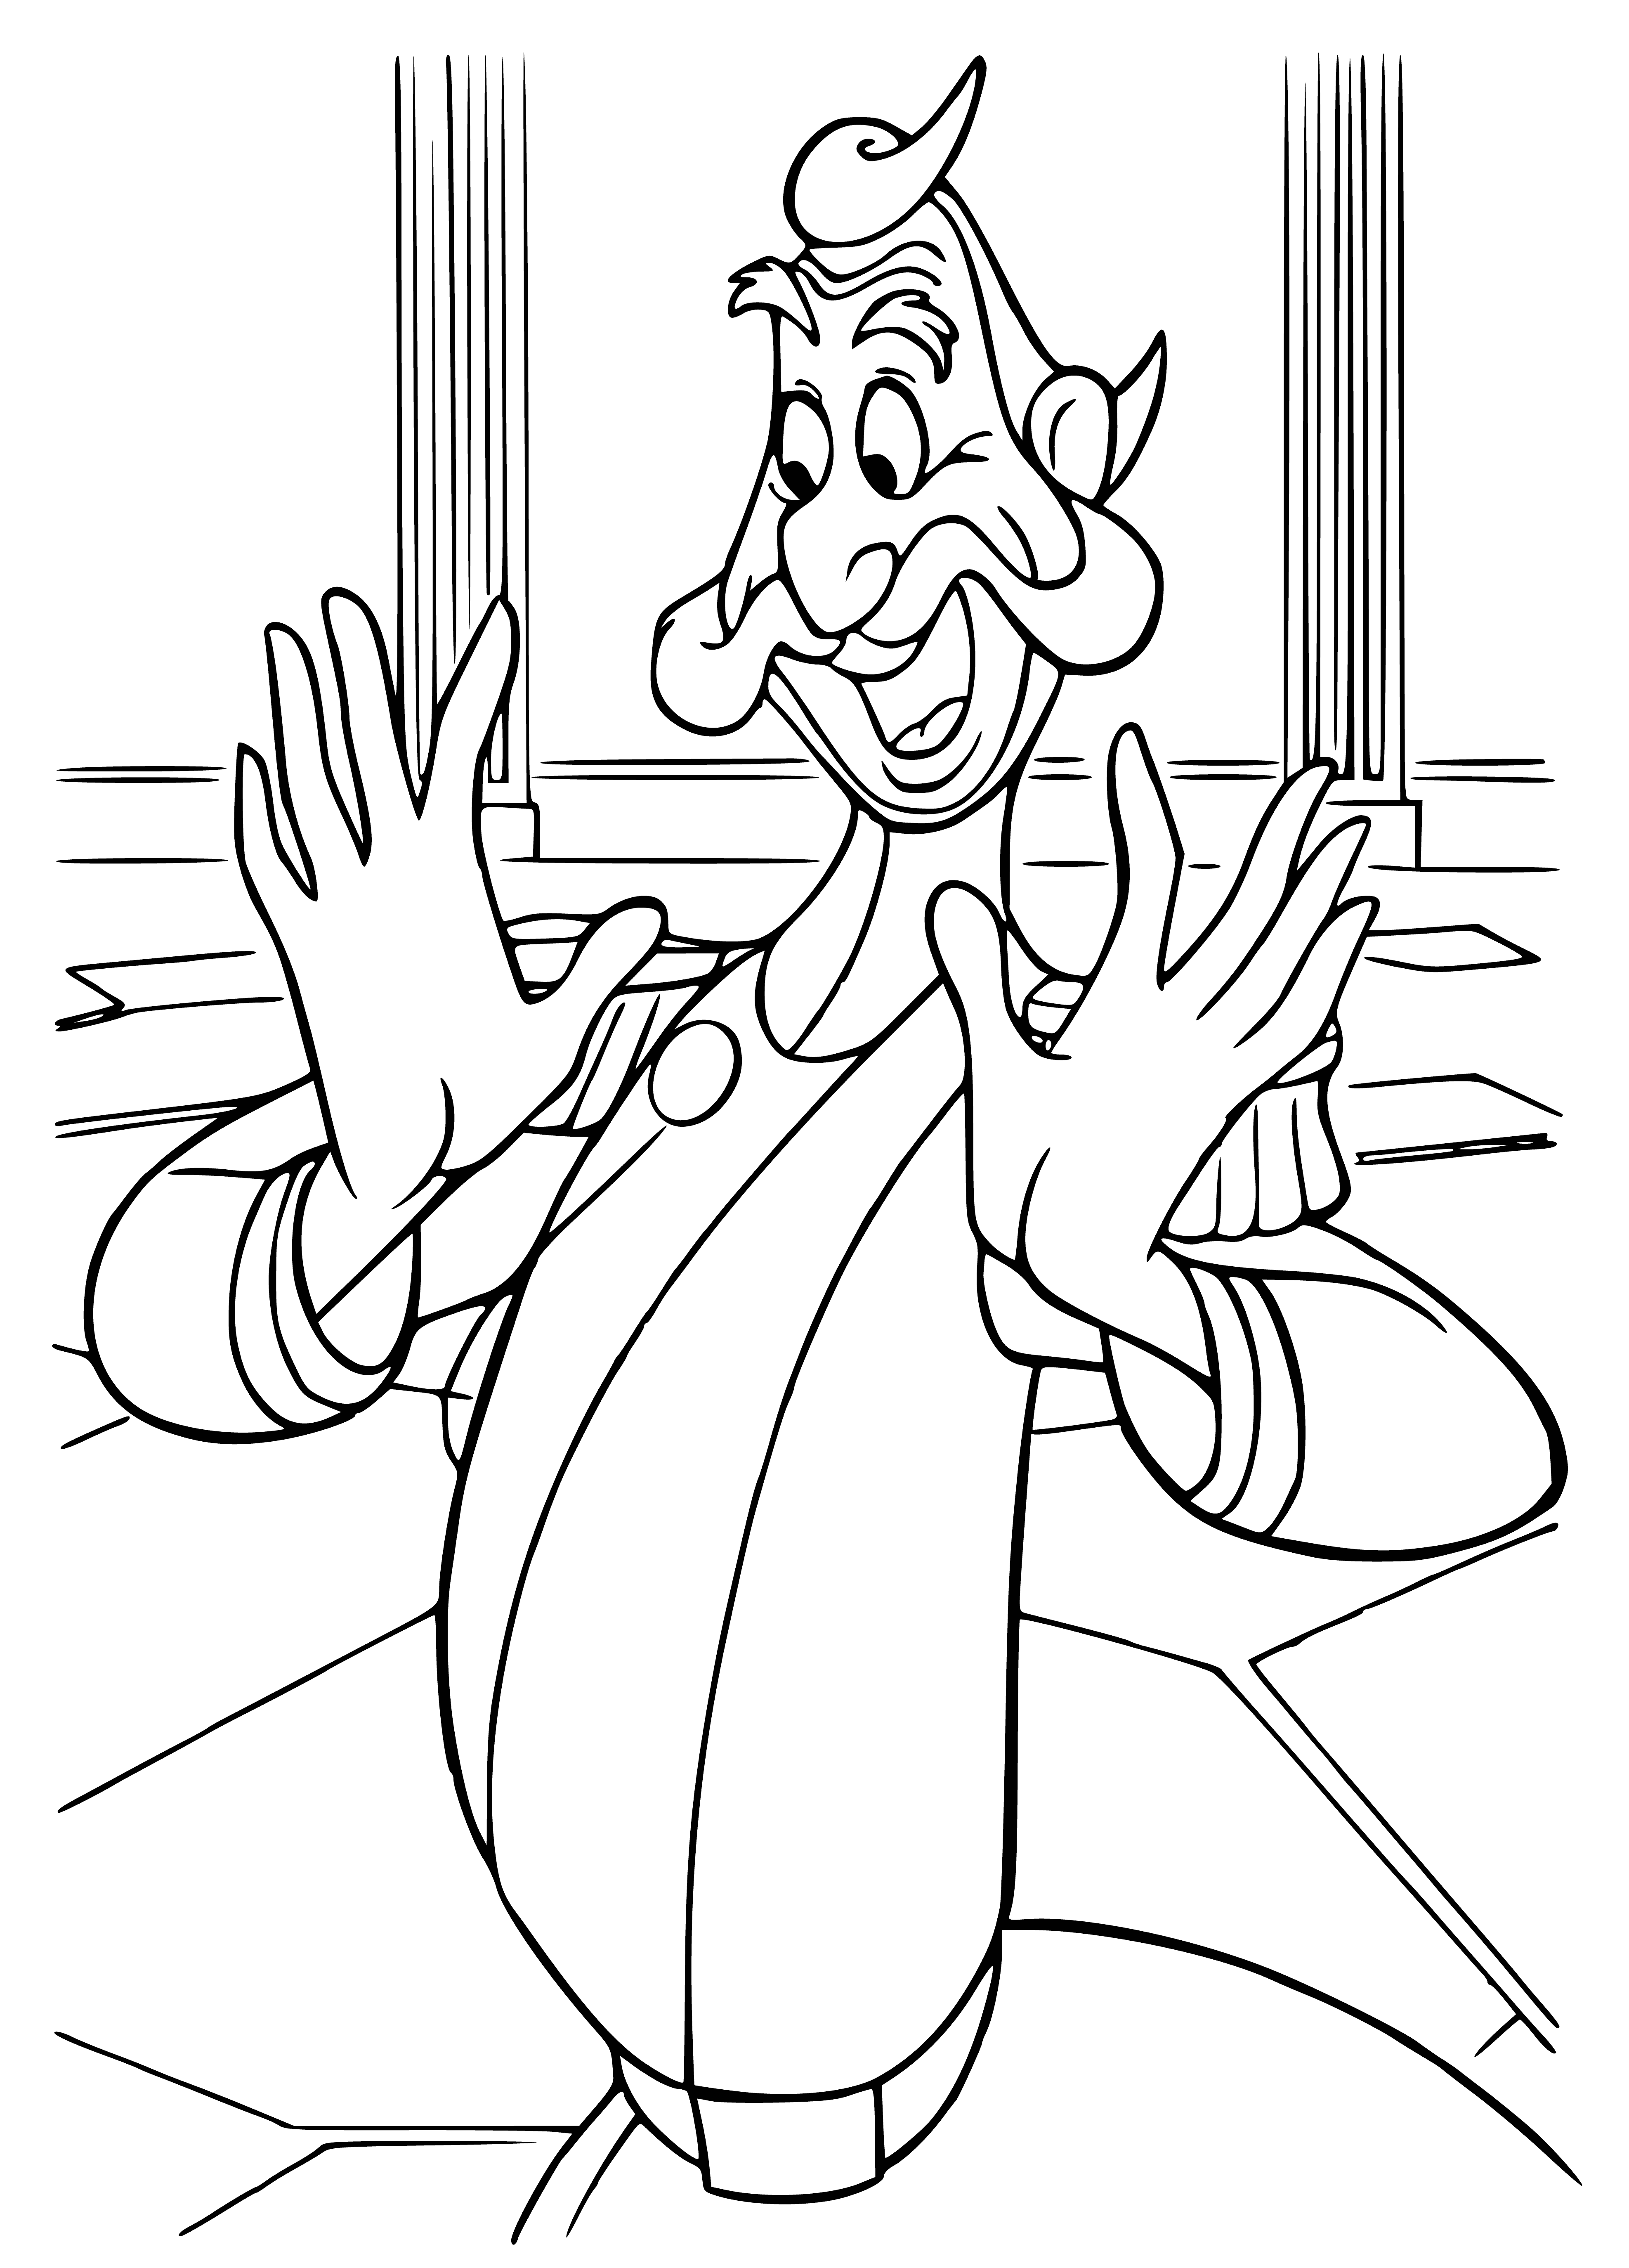 coloring page: Woman in white and man in blue, standing before fireplace - she looks happy, he looks angry.